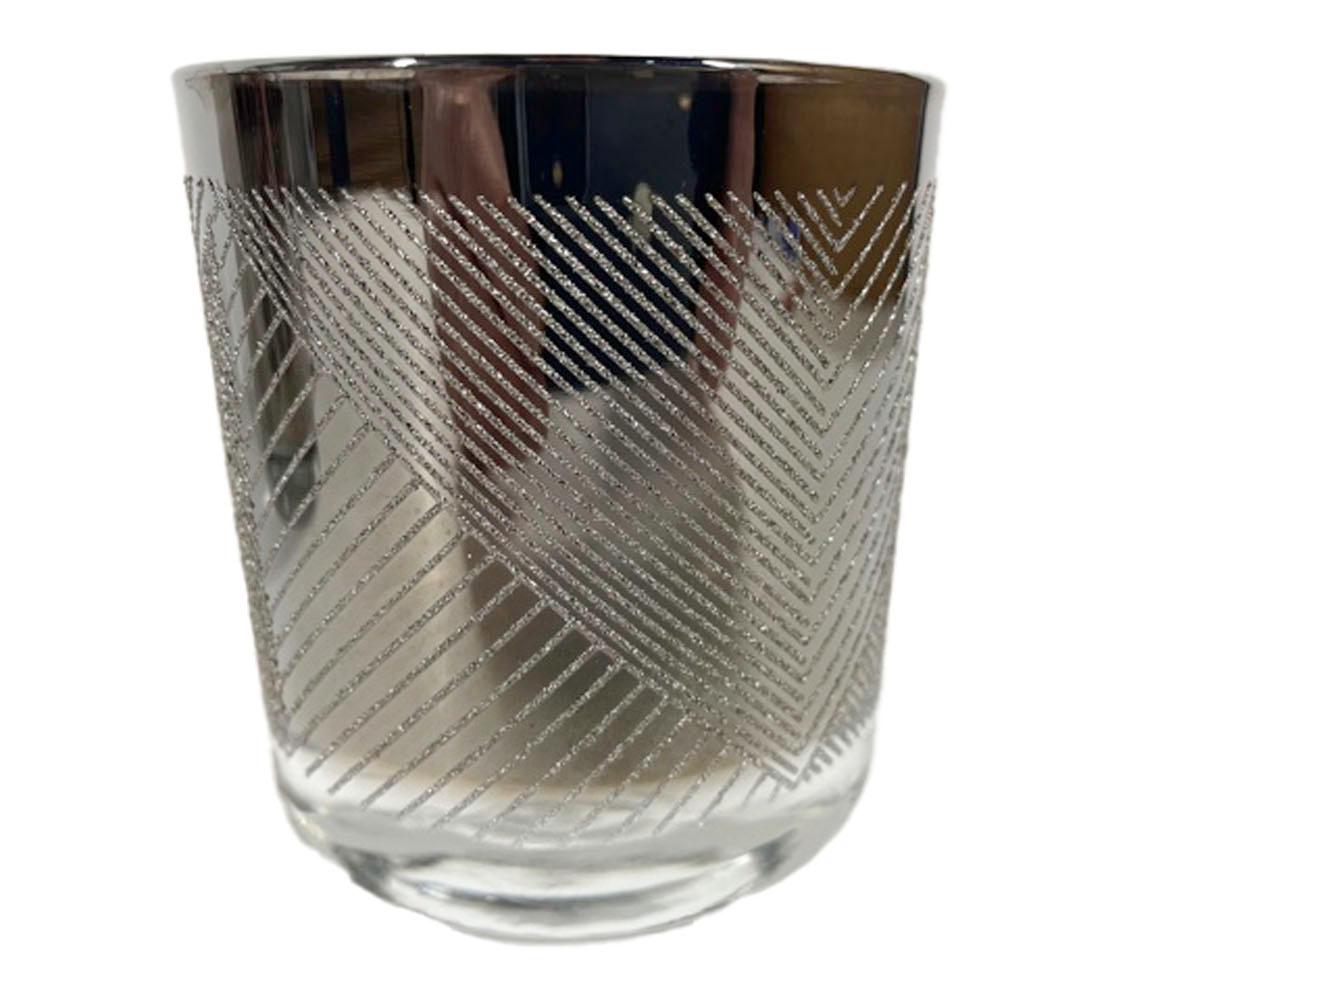 American Six Vintage Rocks Glasses in Silver with Patterns of Raised Textured Lines